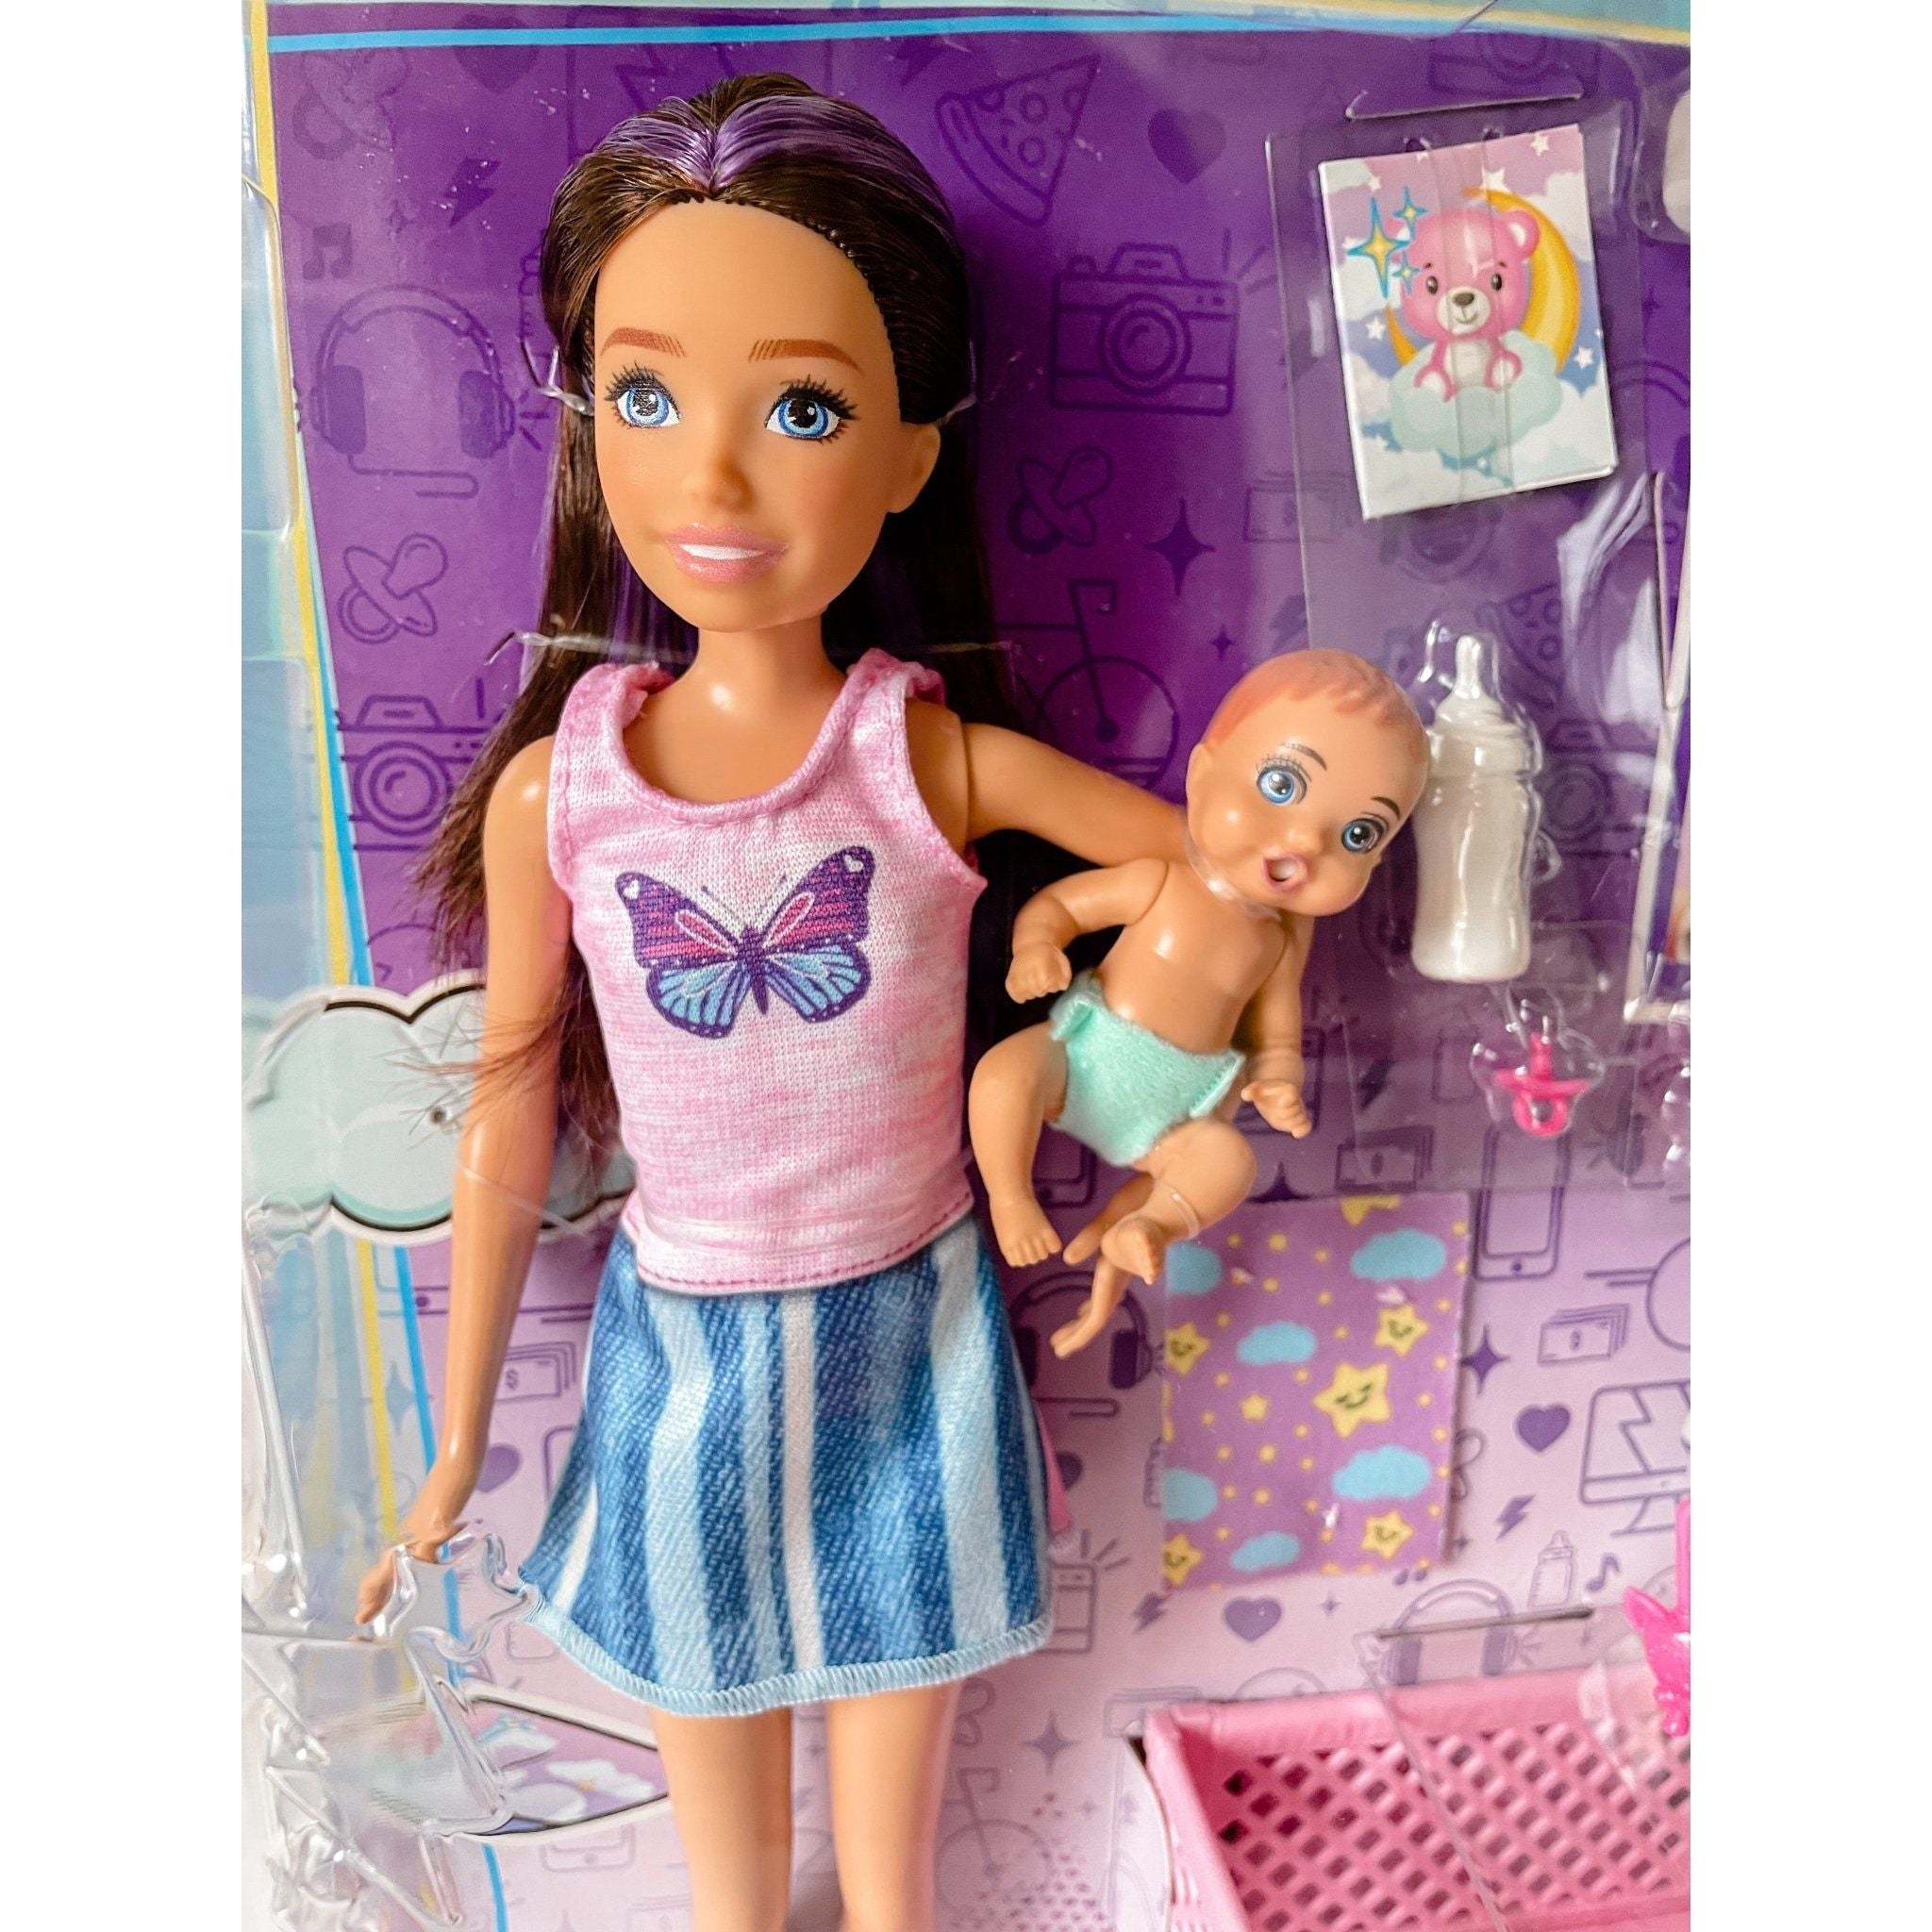 Barbie Skipper Babysitters Playset with Skipper Doll, Baby Doll with Sleepy  Eyes, Crib & Accessories